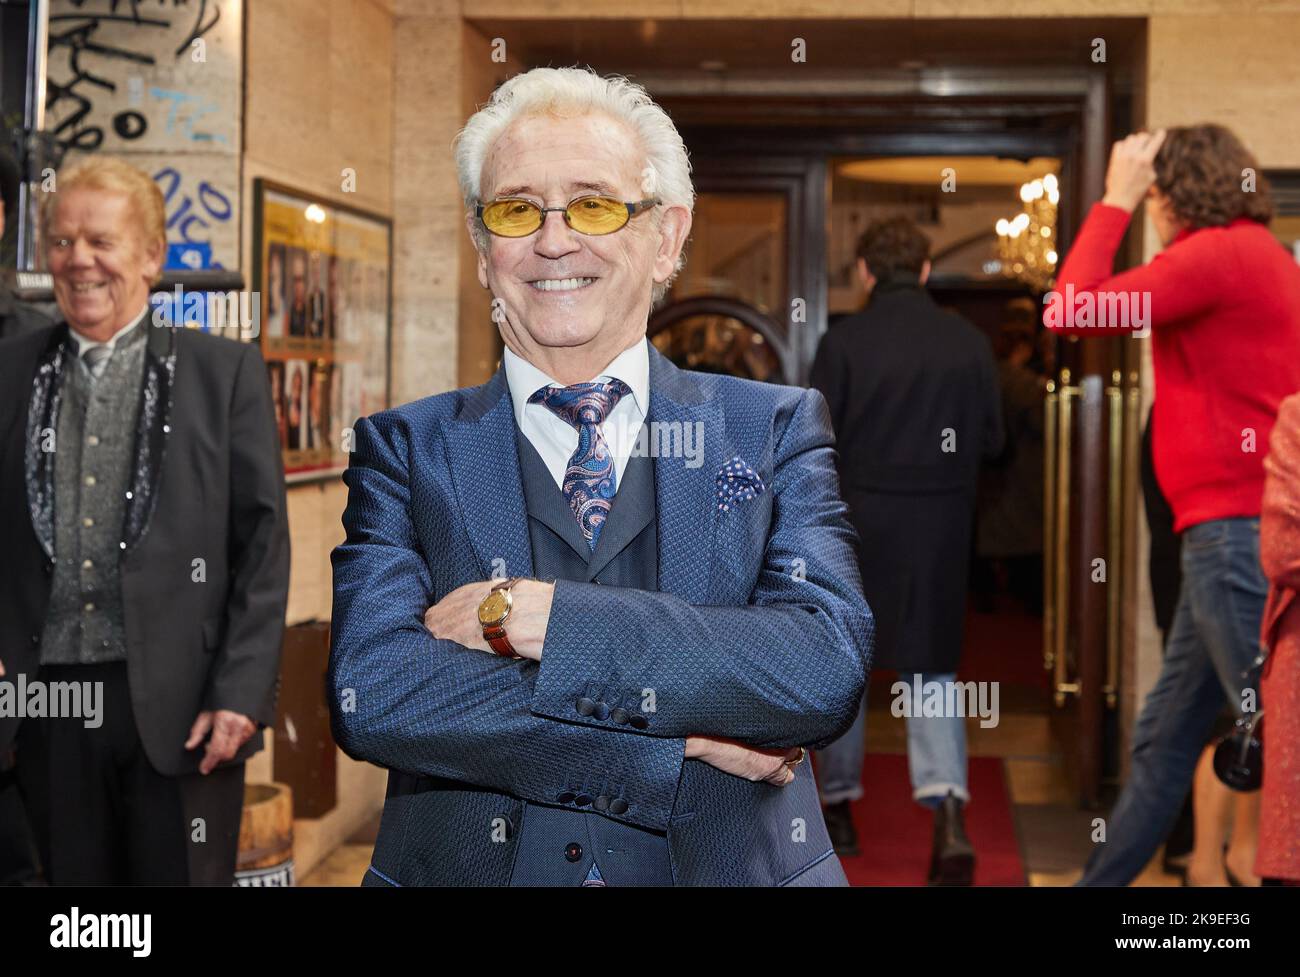 Hamburg, Germany. 27th Oct, 2022. Tony Christie, English musician, singer and actor, comes to the gala premiere on the occasion of the new season of vaudeville at the Hansa Theater. Credit: Georg Wendt/dpa/Alamy Live News Stock Photo